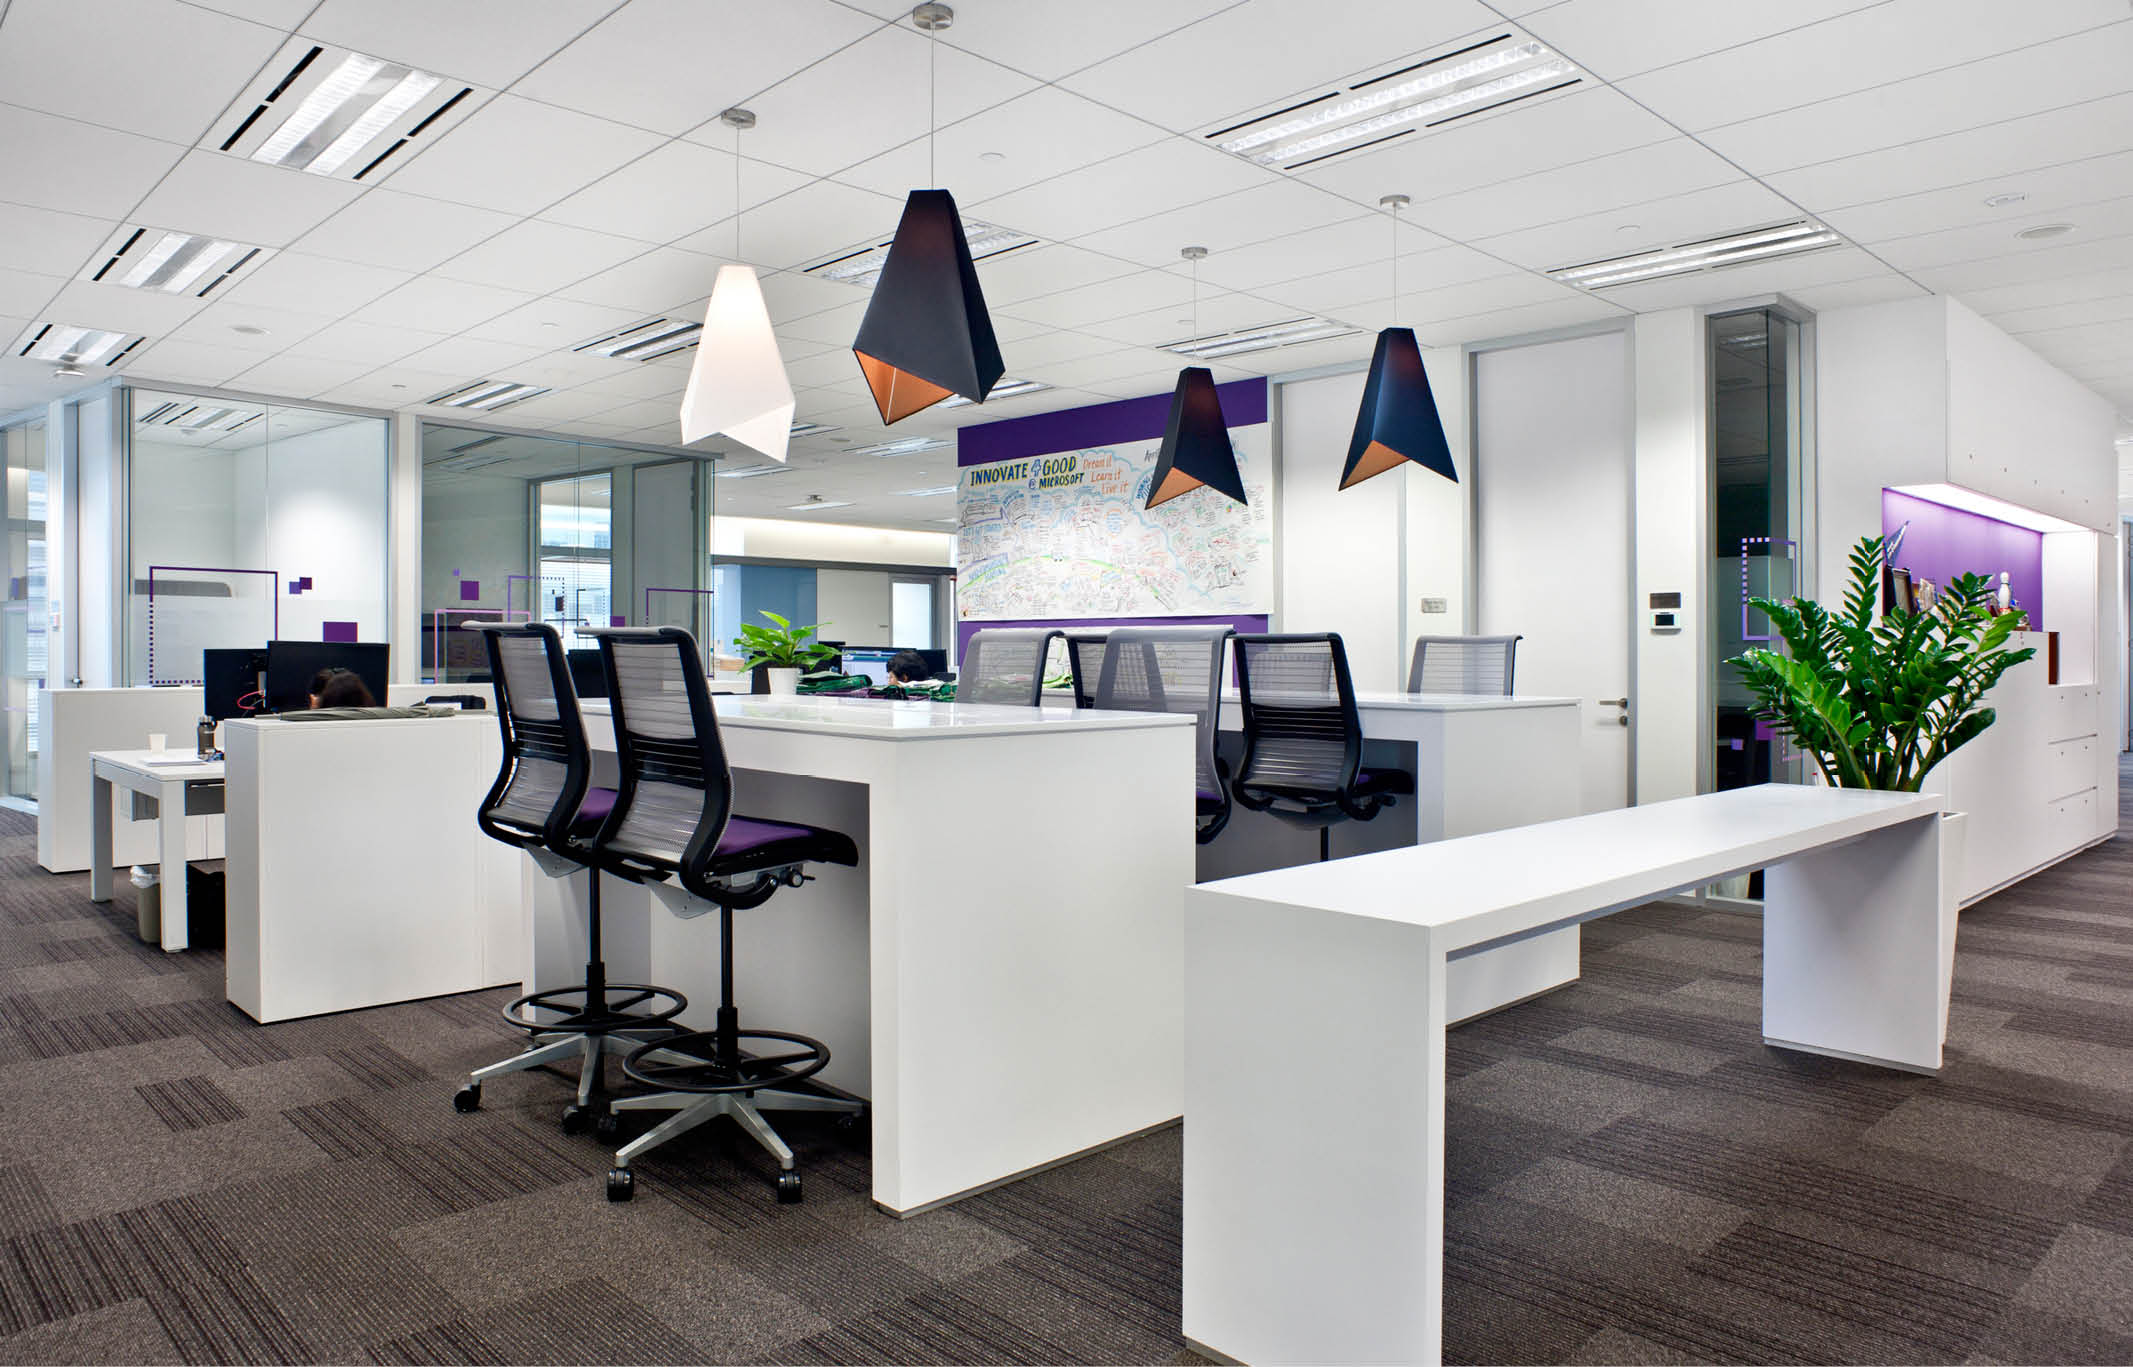 High tables with office chairs at Microsoft office Singapore fit out by ISG Ltd